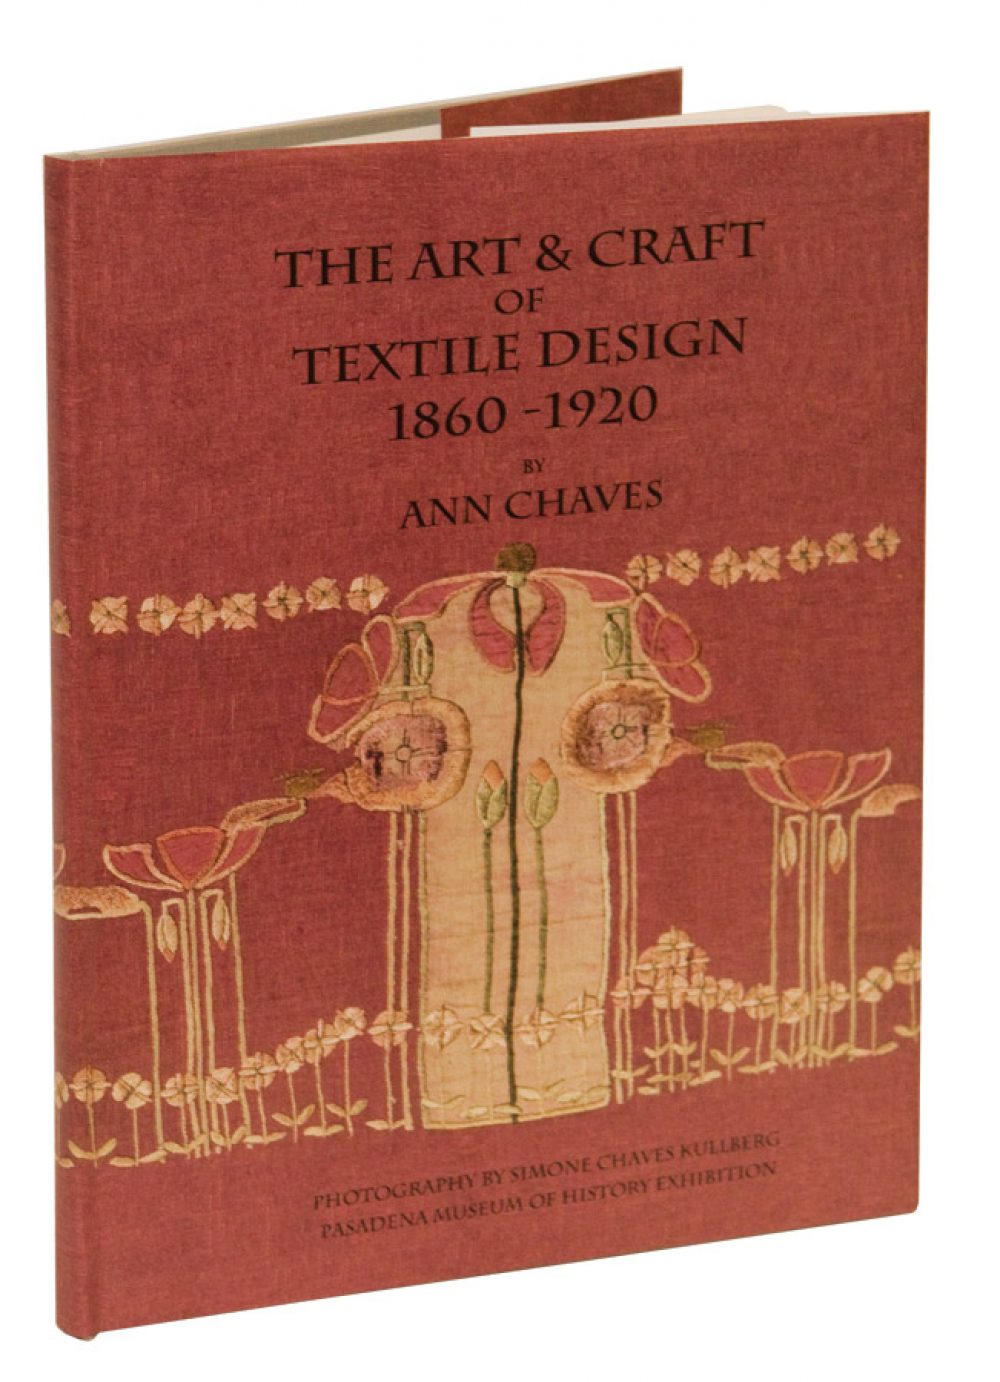 The Art & Craft of Textile Design, 1860-1920 Hardcover by Ann Chaves